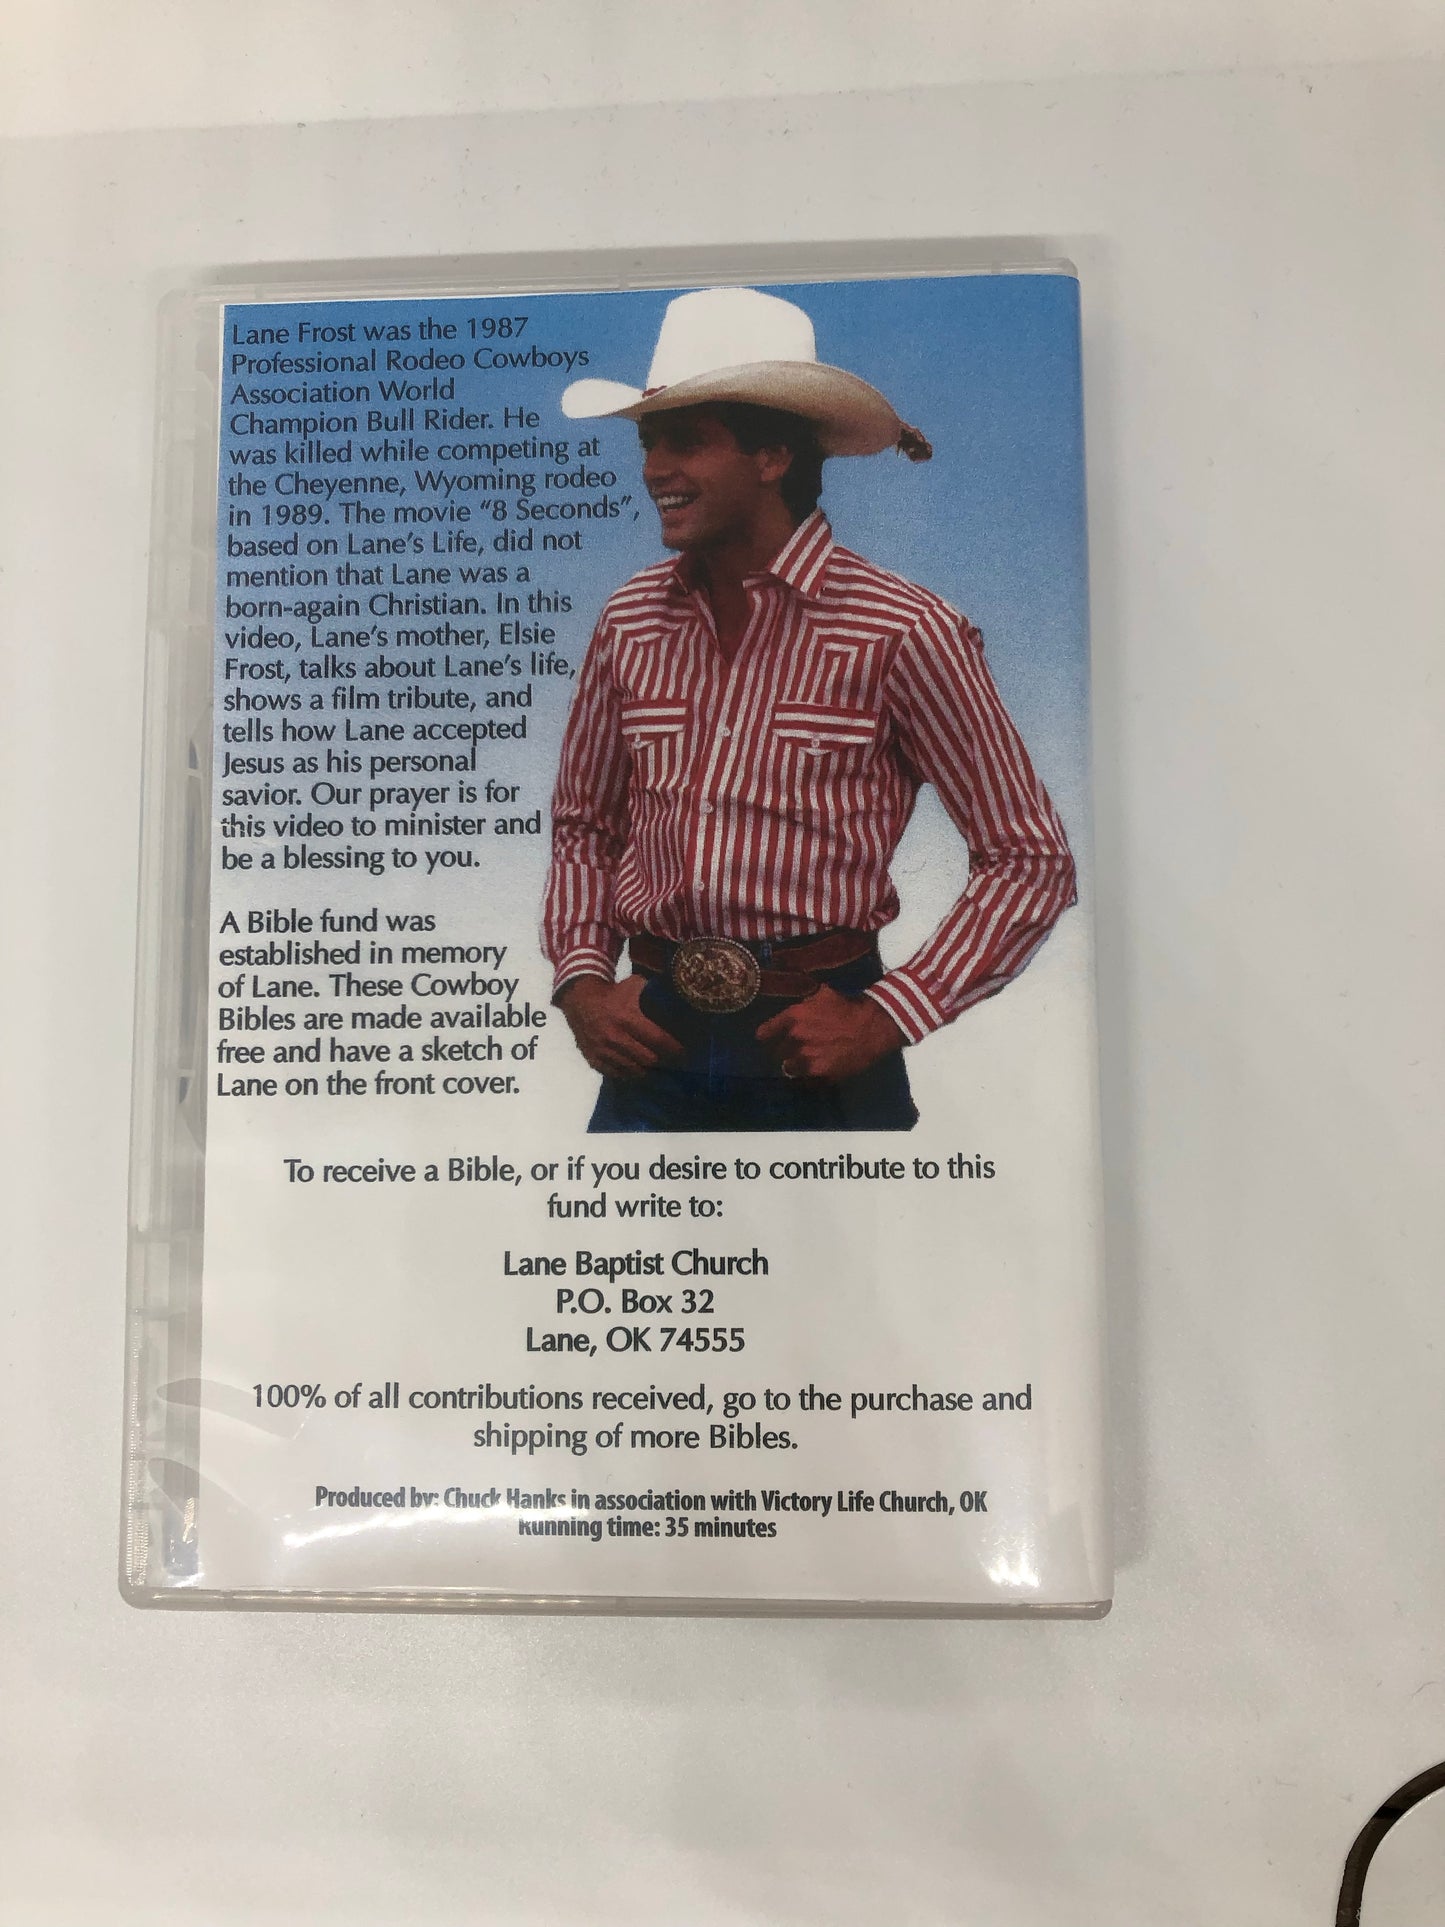 Lane Frost A Mother’s Story